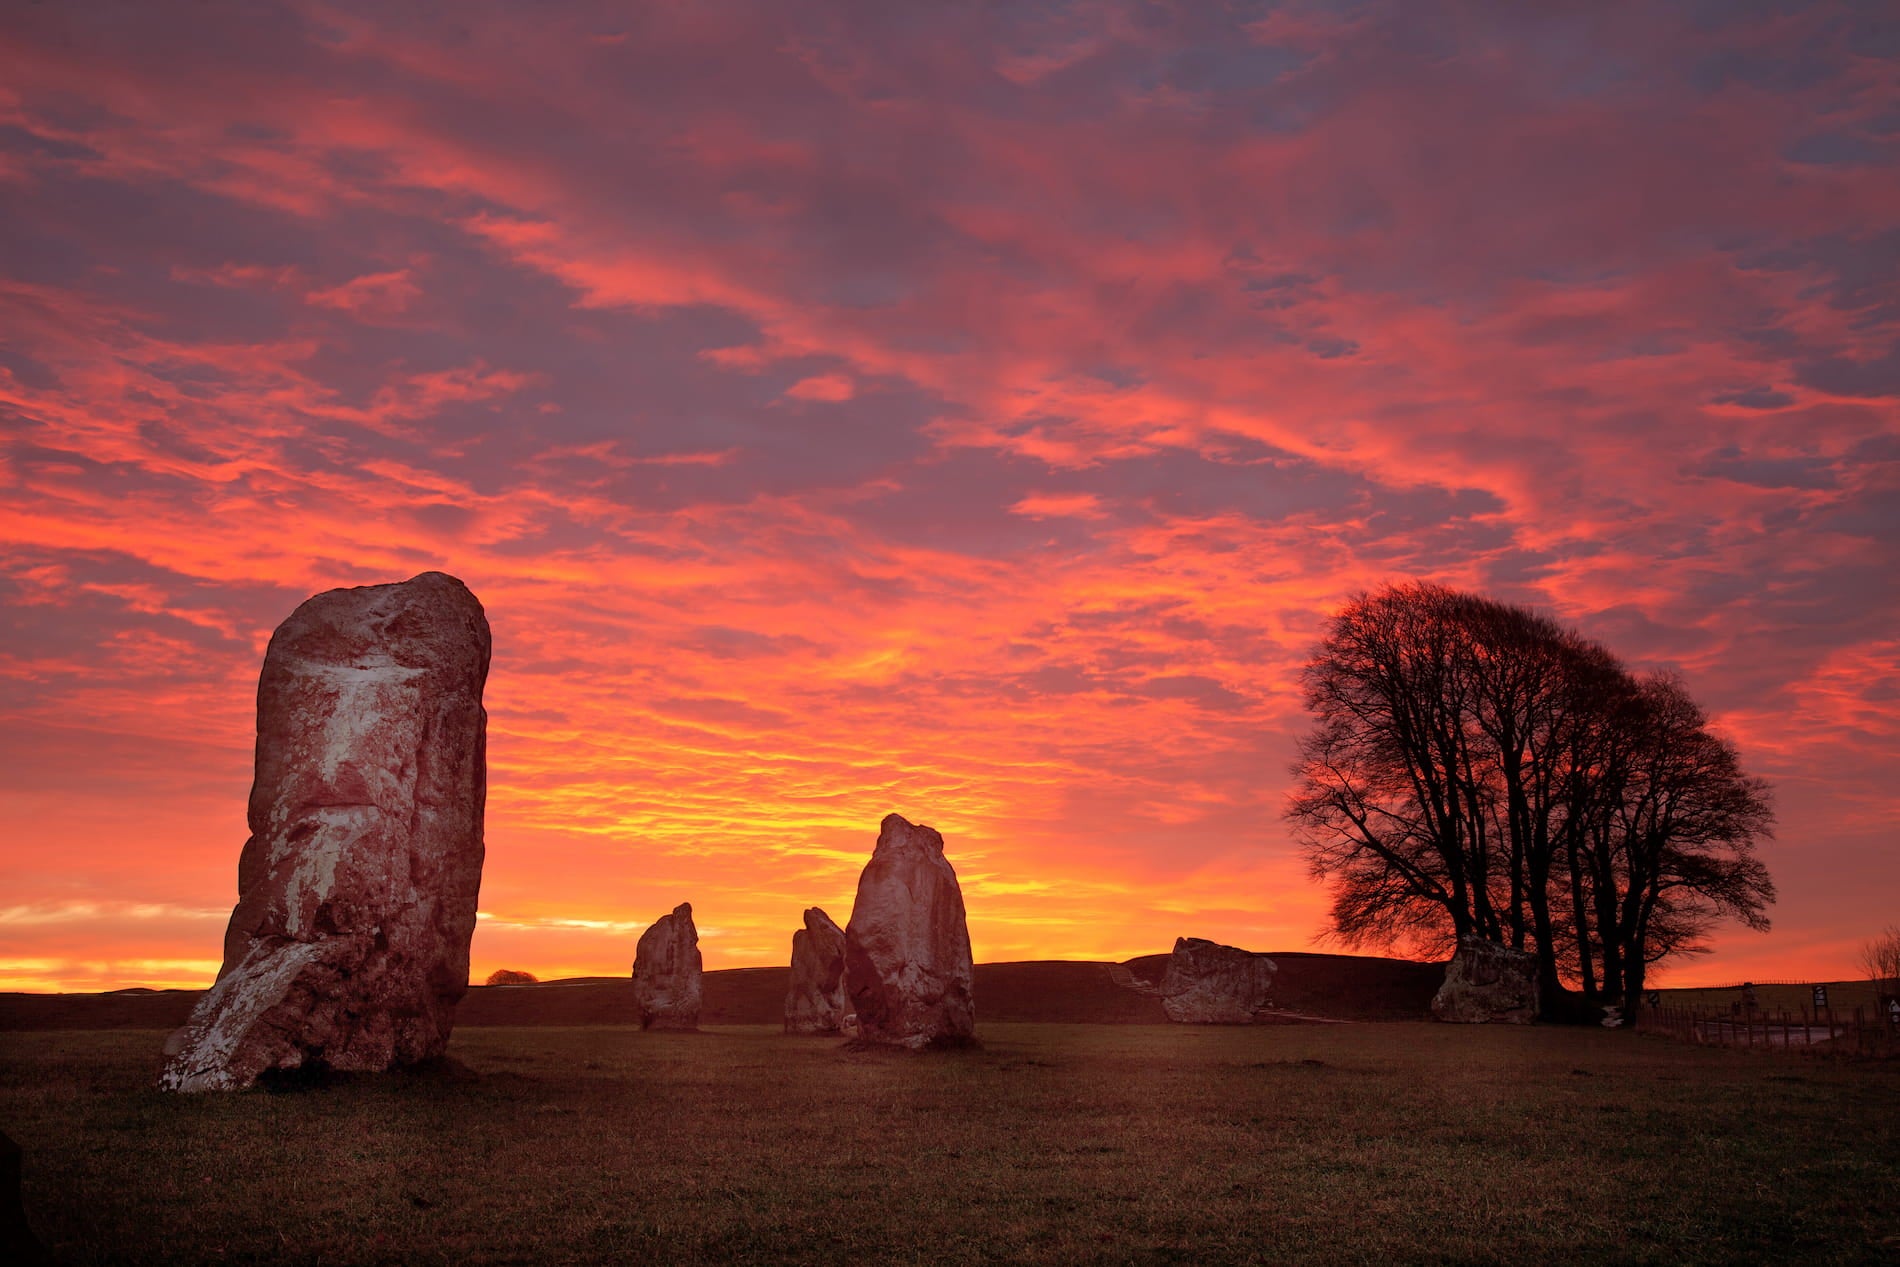 A breathtaking sunrise over a mystical stone circle, shrouded in ancient secrets and natural beauty.